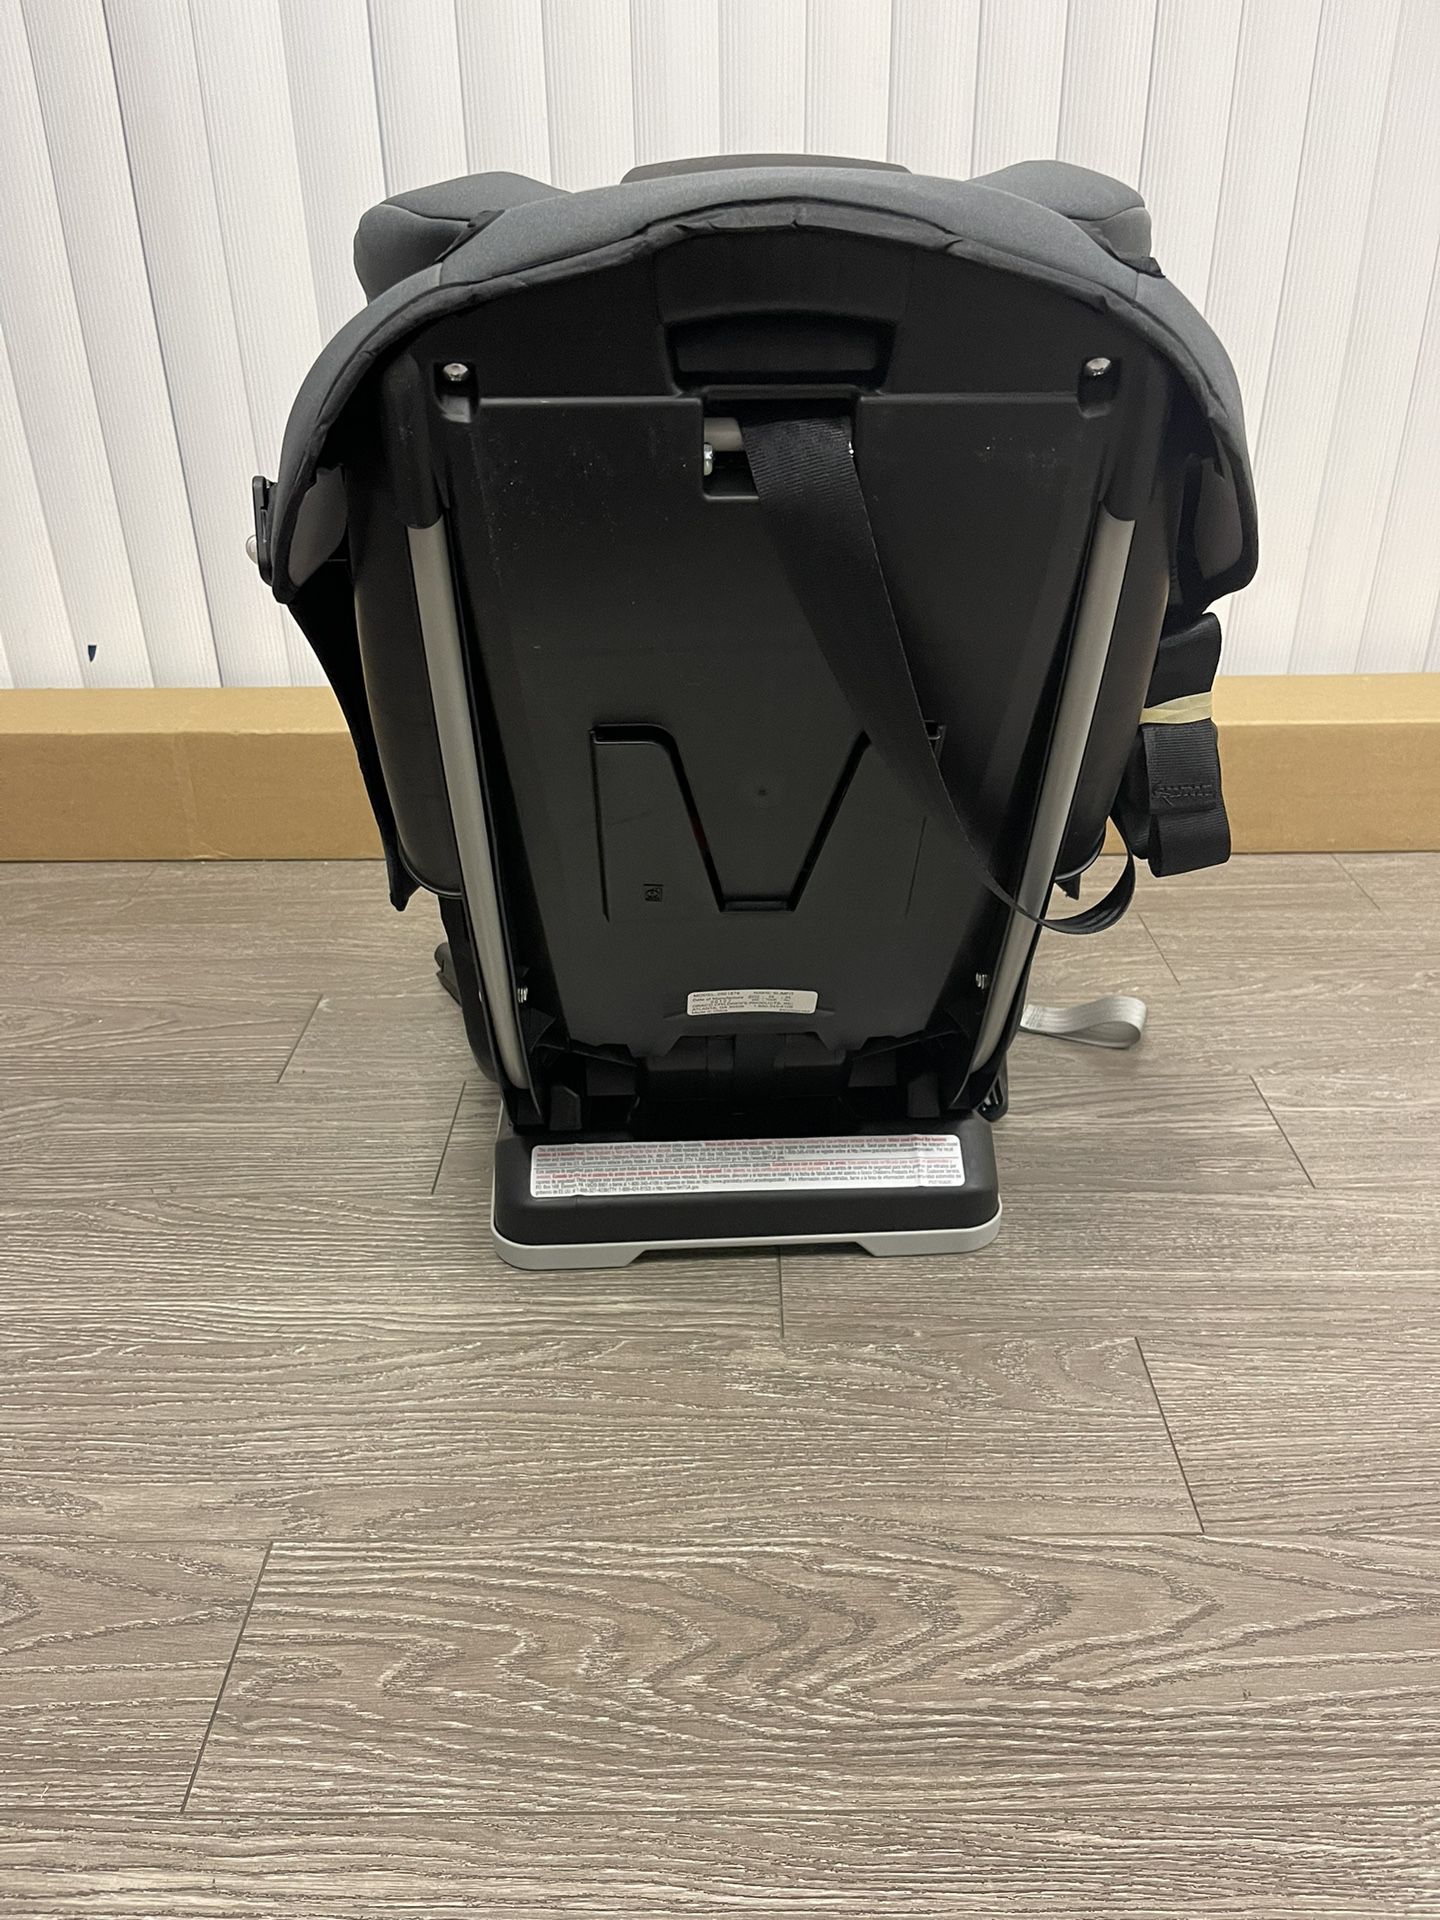 Graco SlimFit 3 in 1 Car Seat With Car Seat Protector Included For Free for  Sale in Turlock, CA - OfferUp